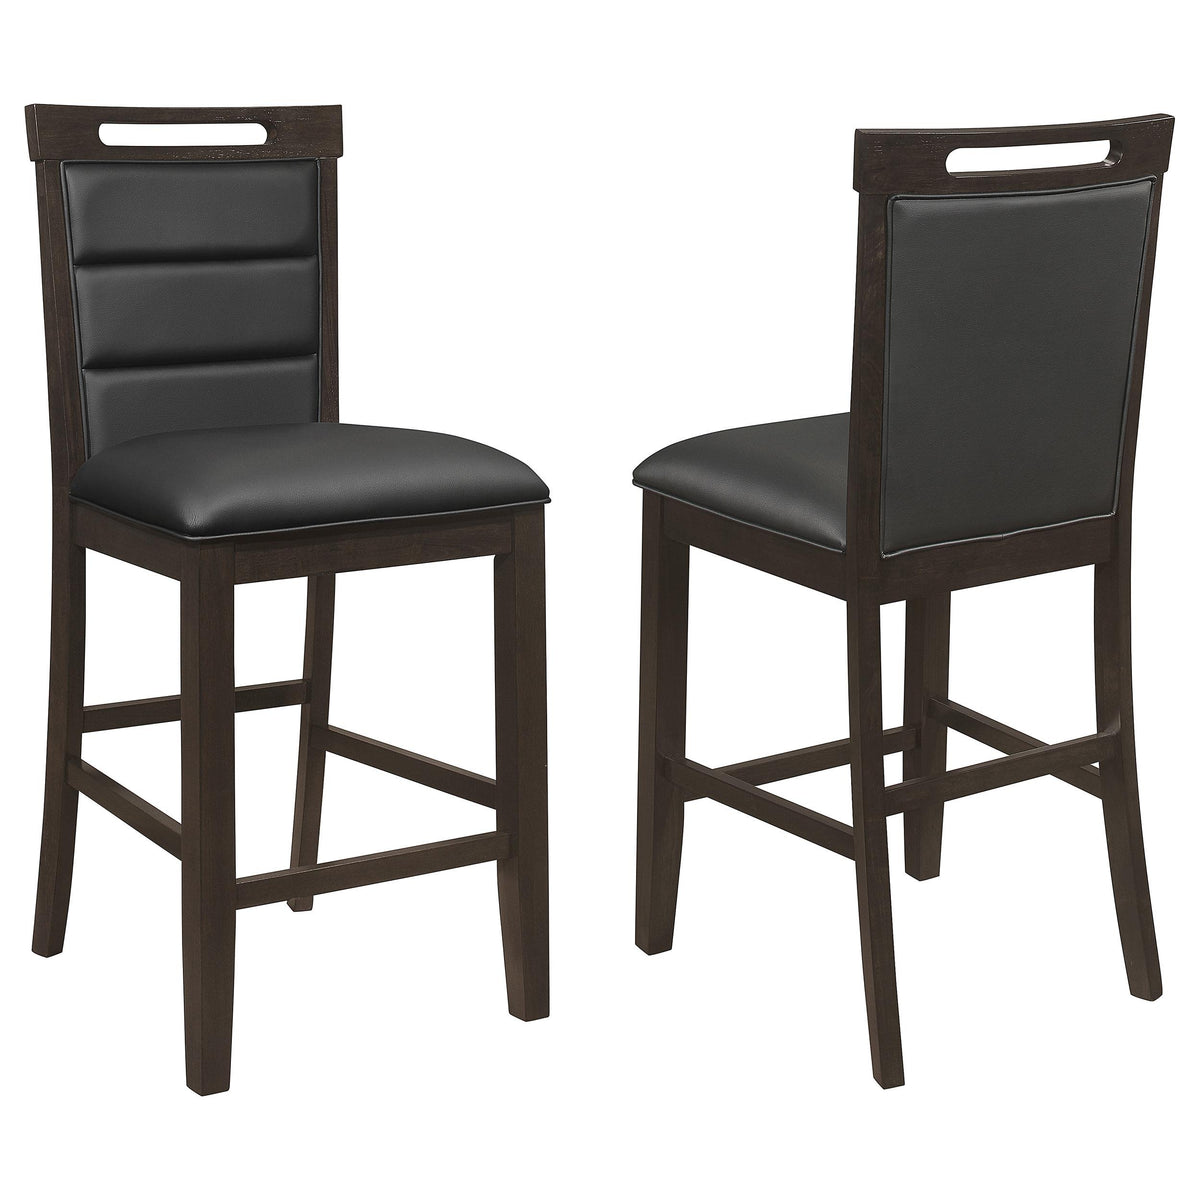 Prentiss Upholstered Counter Height Chair (Set of 2) Black and Cappuccino Prentiss Upholstered Counter Height Chair (Set of 2) Black and Cappuccino Half Price Furniture